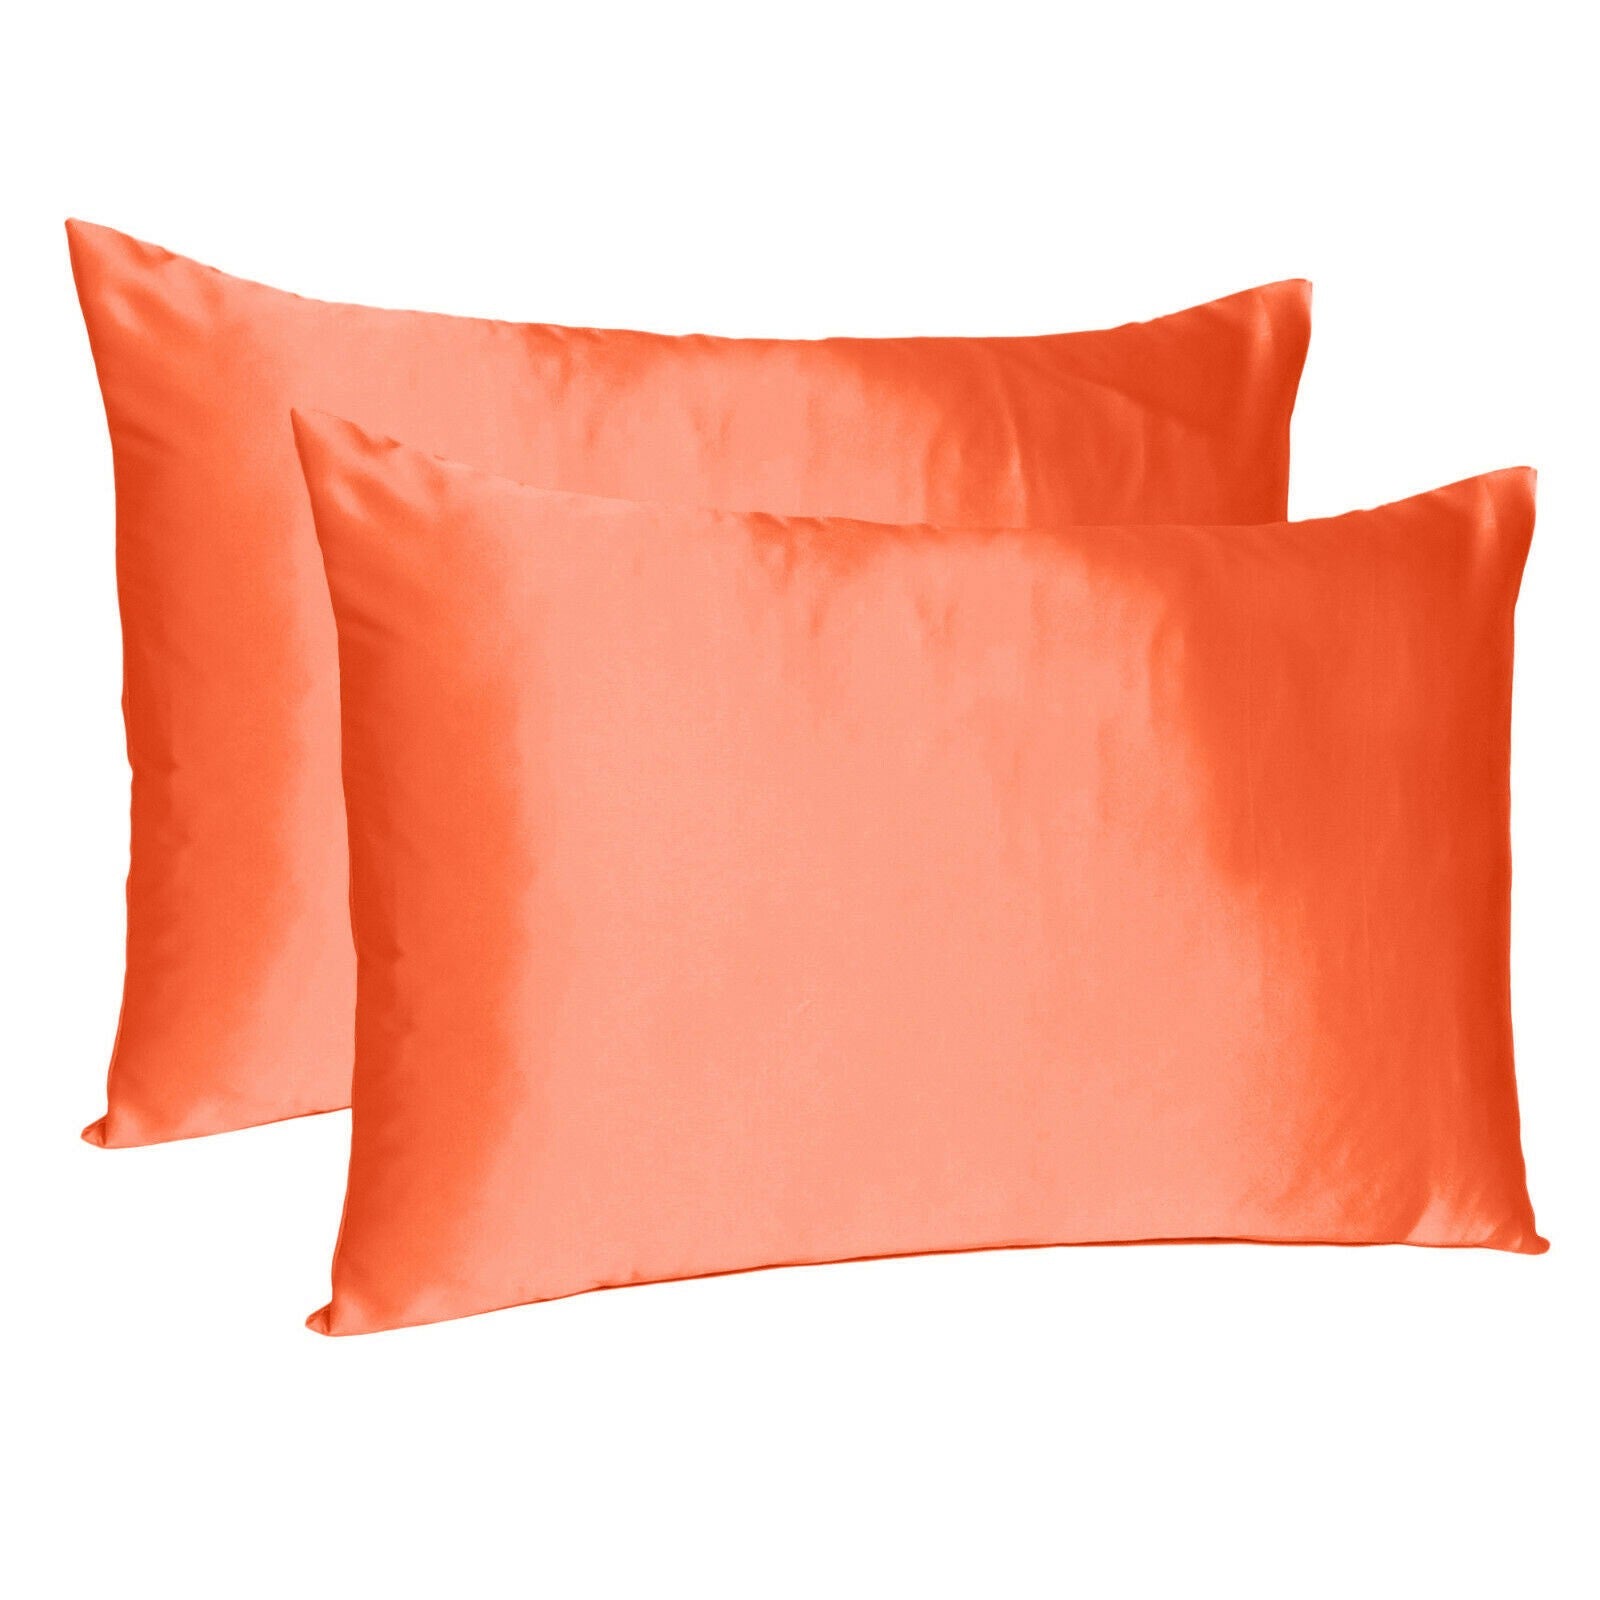 Poppy-Dreamy-Set-Of-2-Silky-Satin-King-Pillowcases-Bed-Sheets